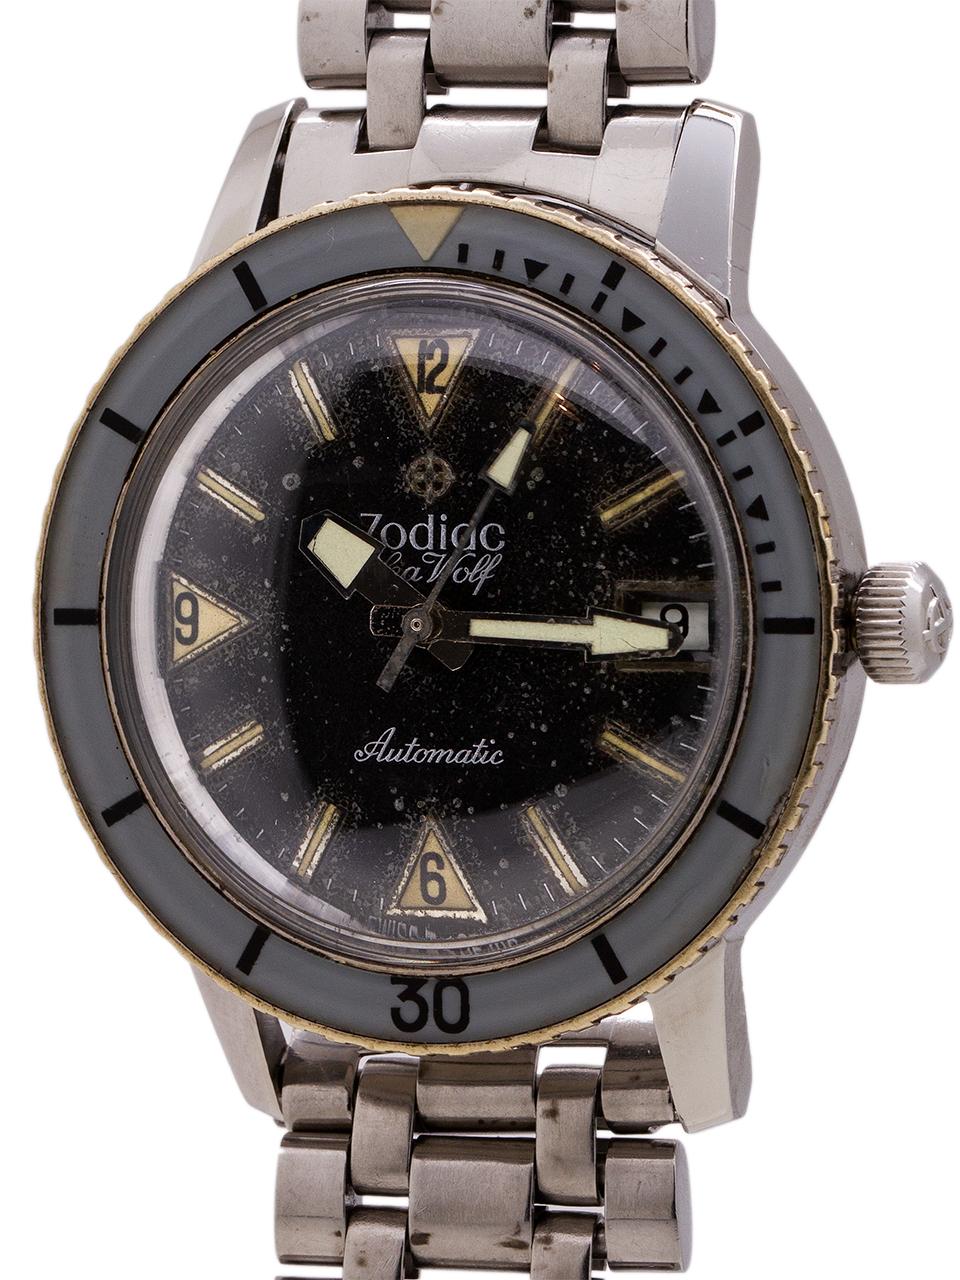 
Vintage 1960’s Zodiac Seawolf, popular diver’s model often associated with the Vietnam War and the U.S. Navy Seals. This is a very nice condition example, featuring a 35mm diameter case, gray bakelite elapsed time bezel, and spotted patina original